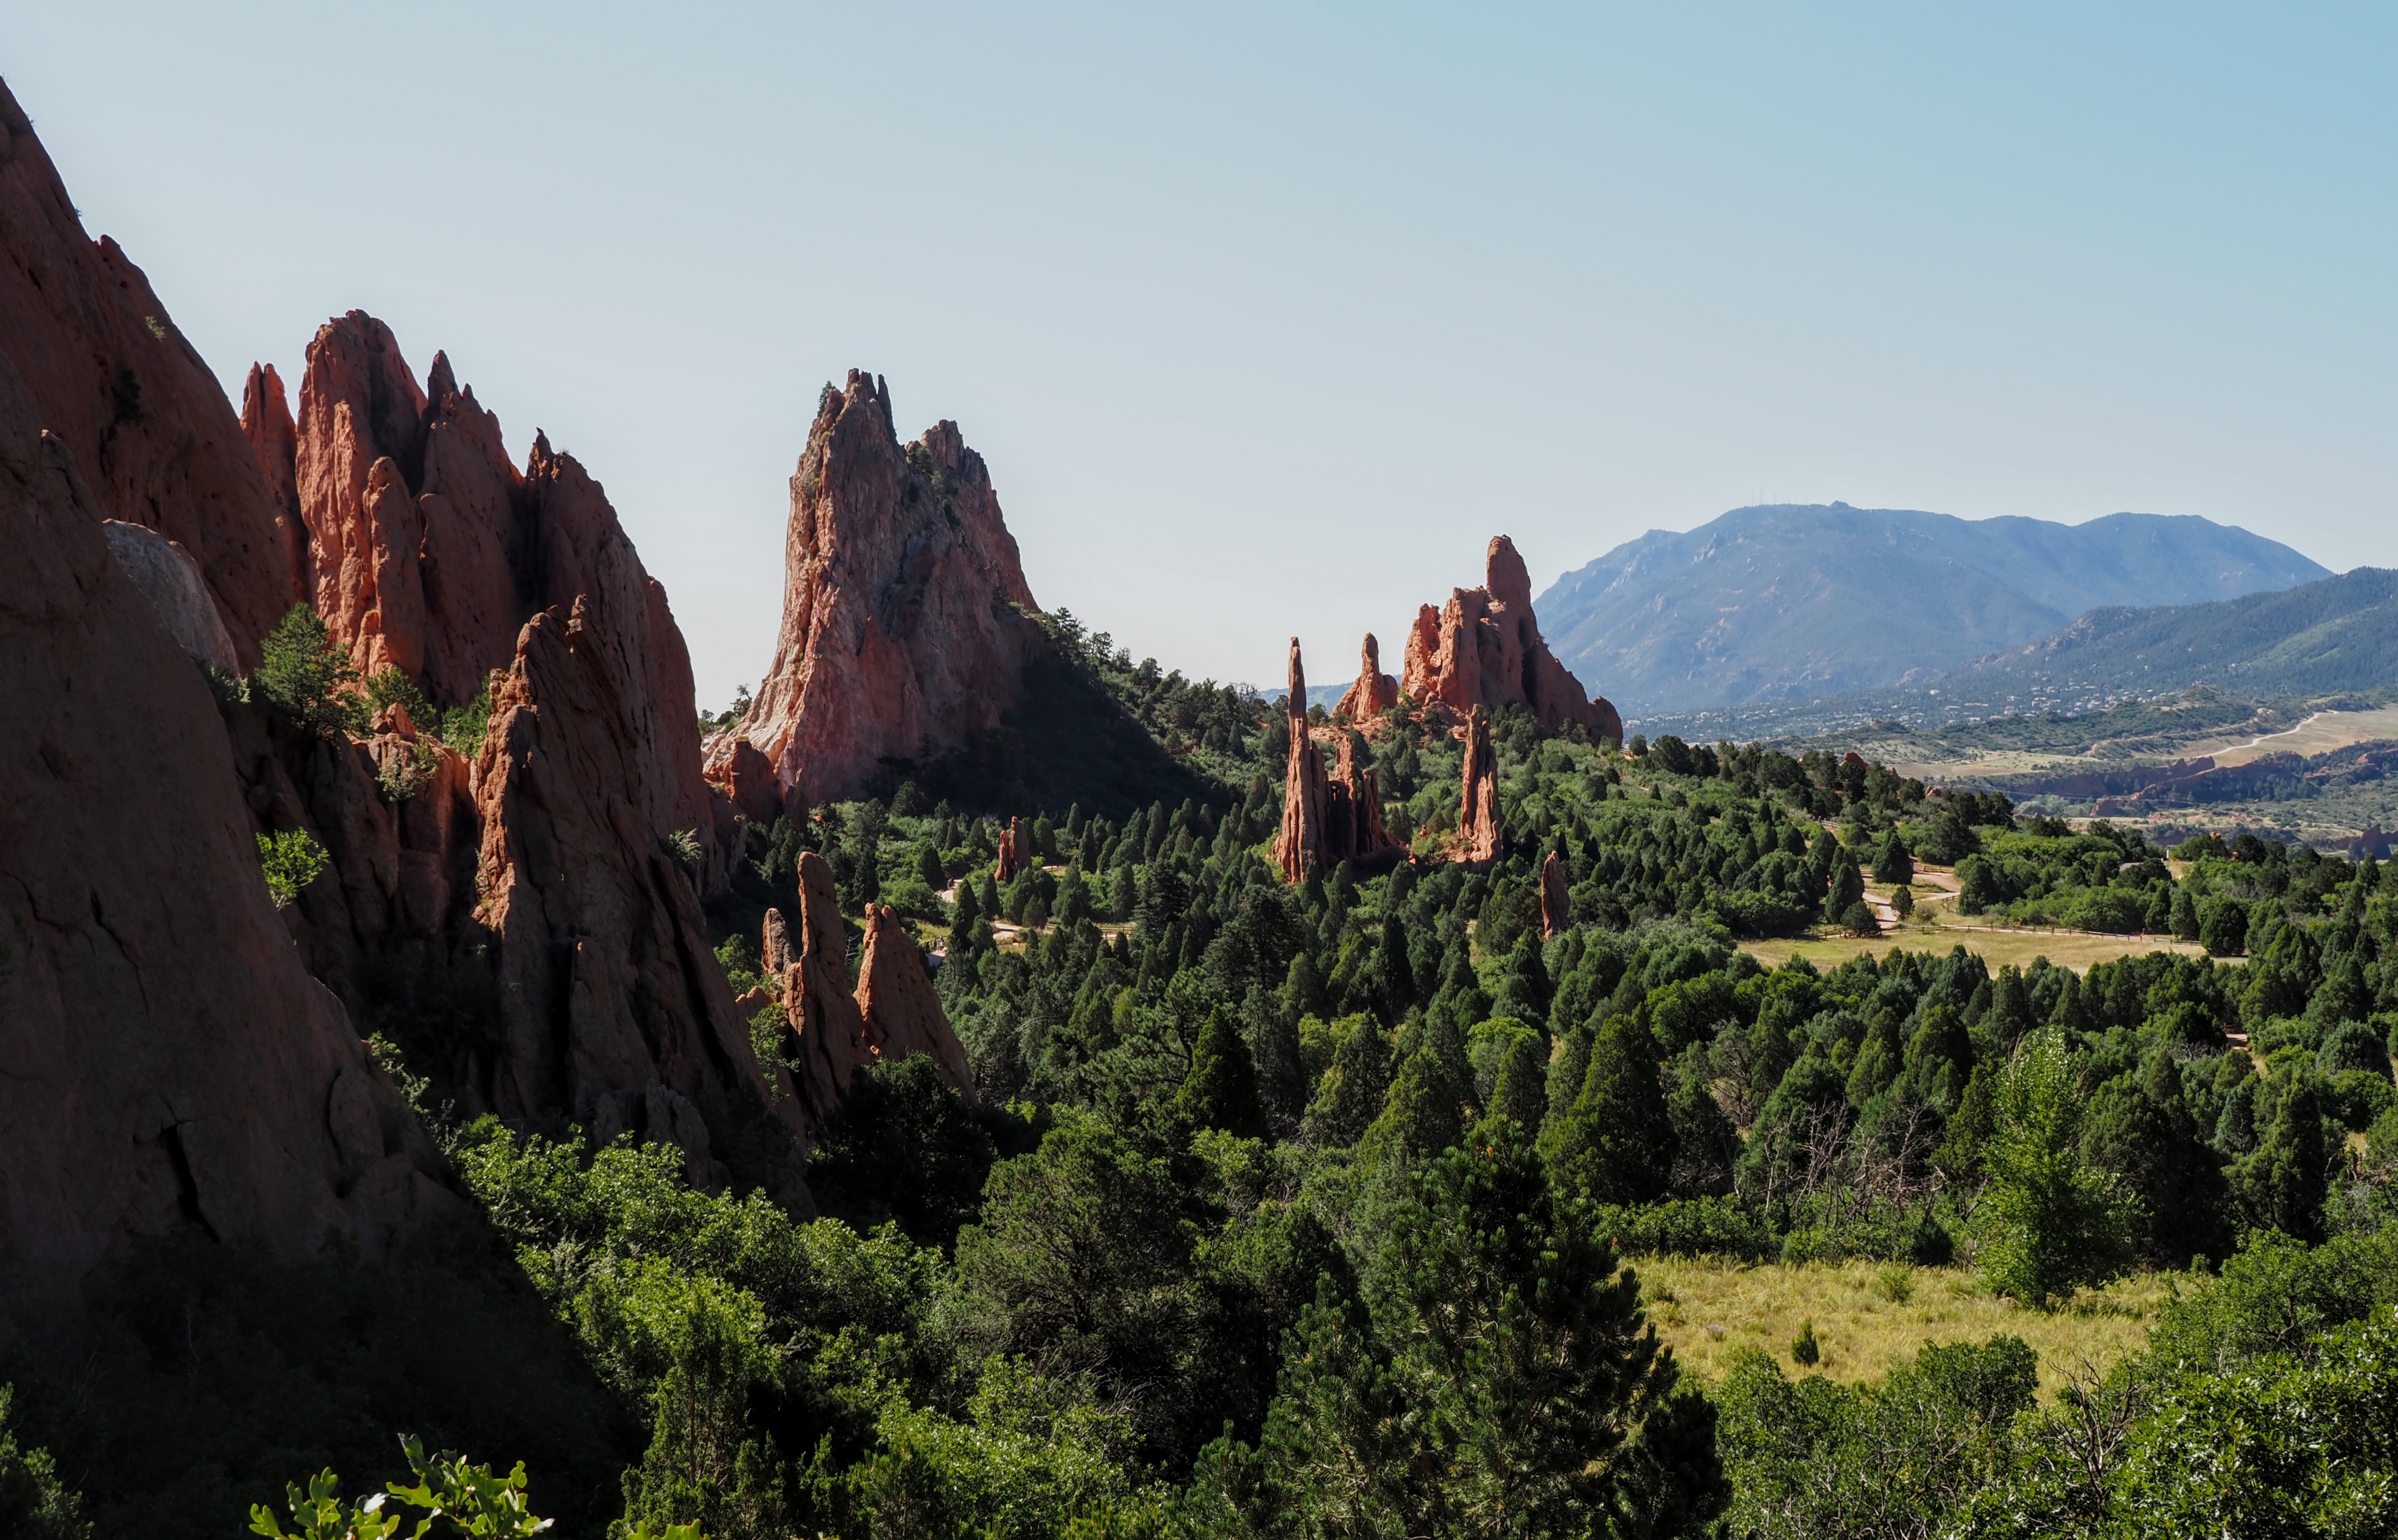 What Is The Garden Of The Gods